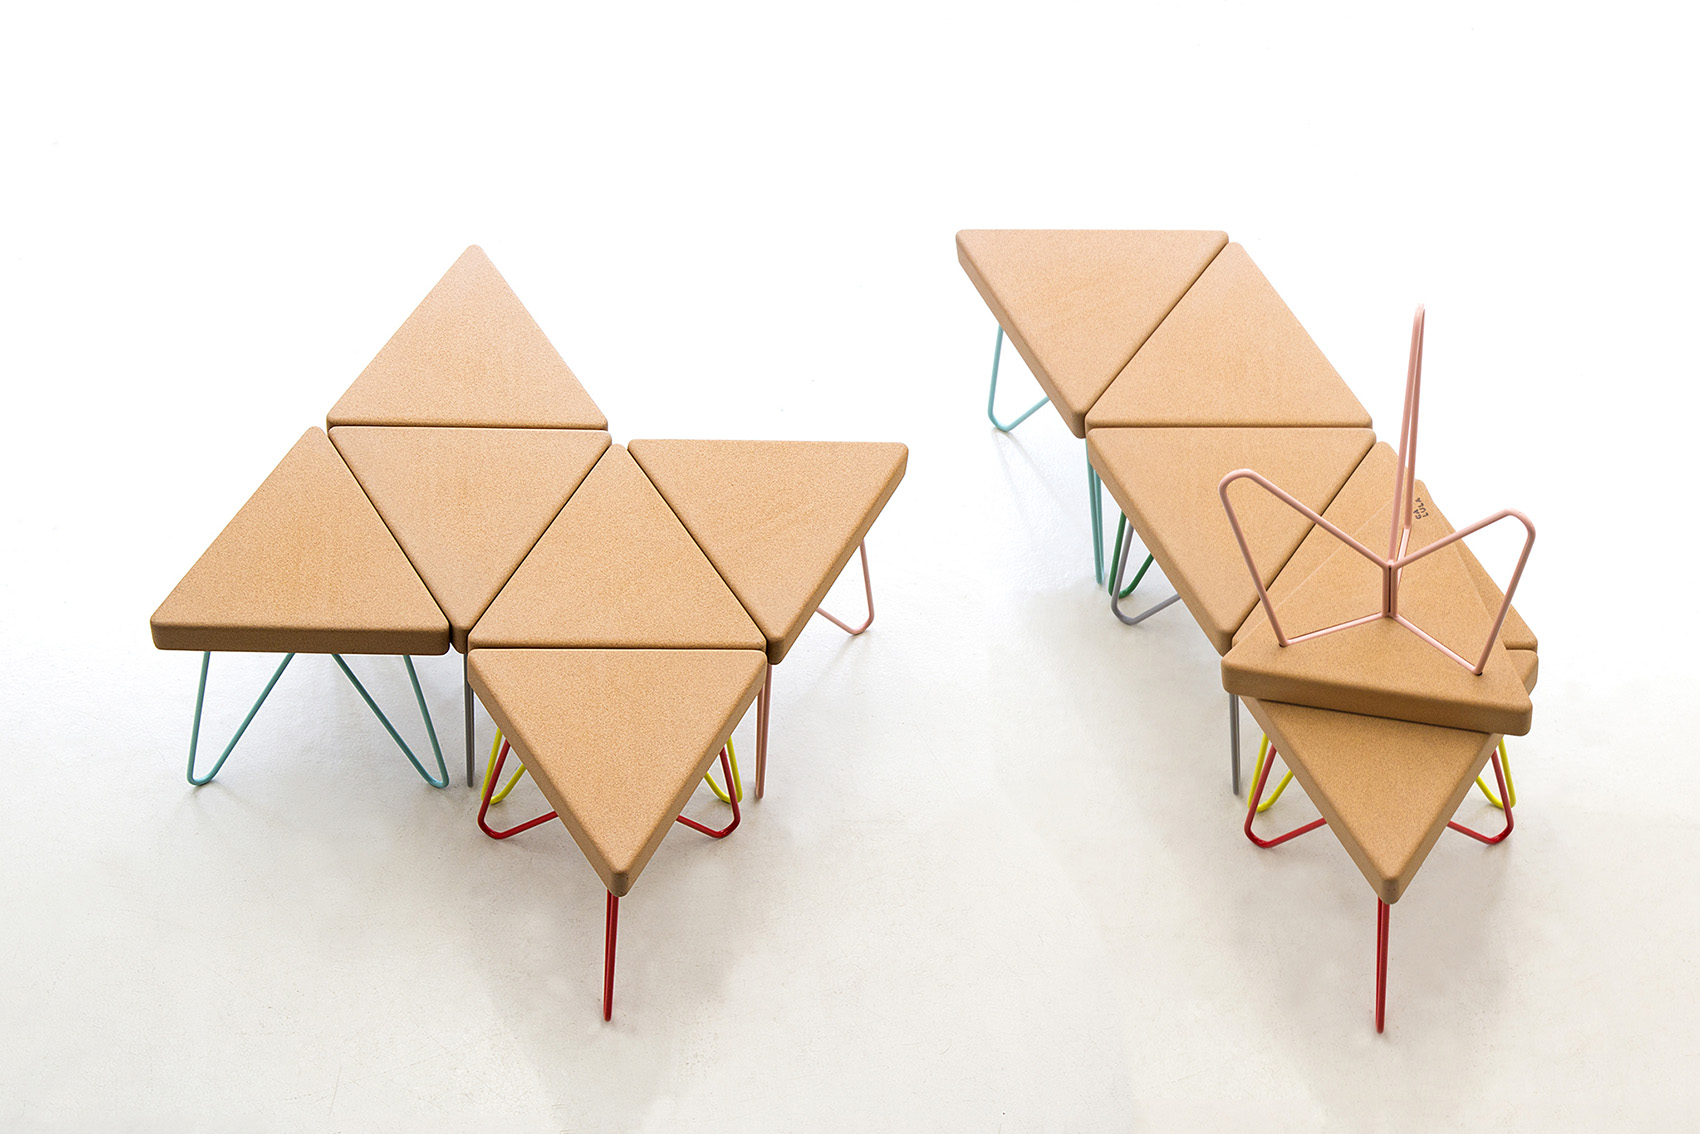 The stool can be used as a table, stool, chair, it's perfect for kids' spaces